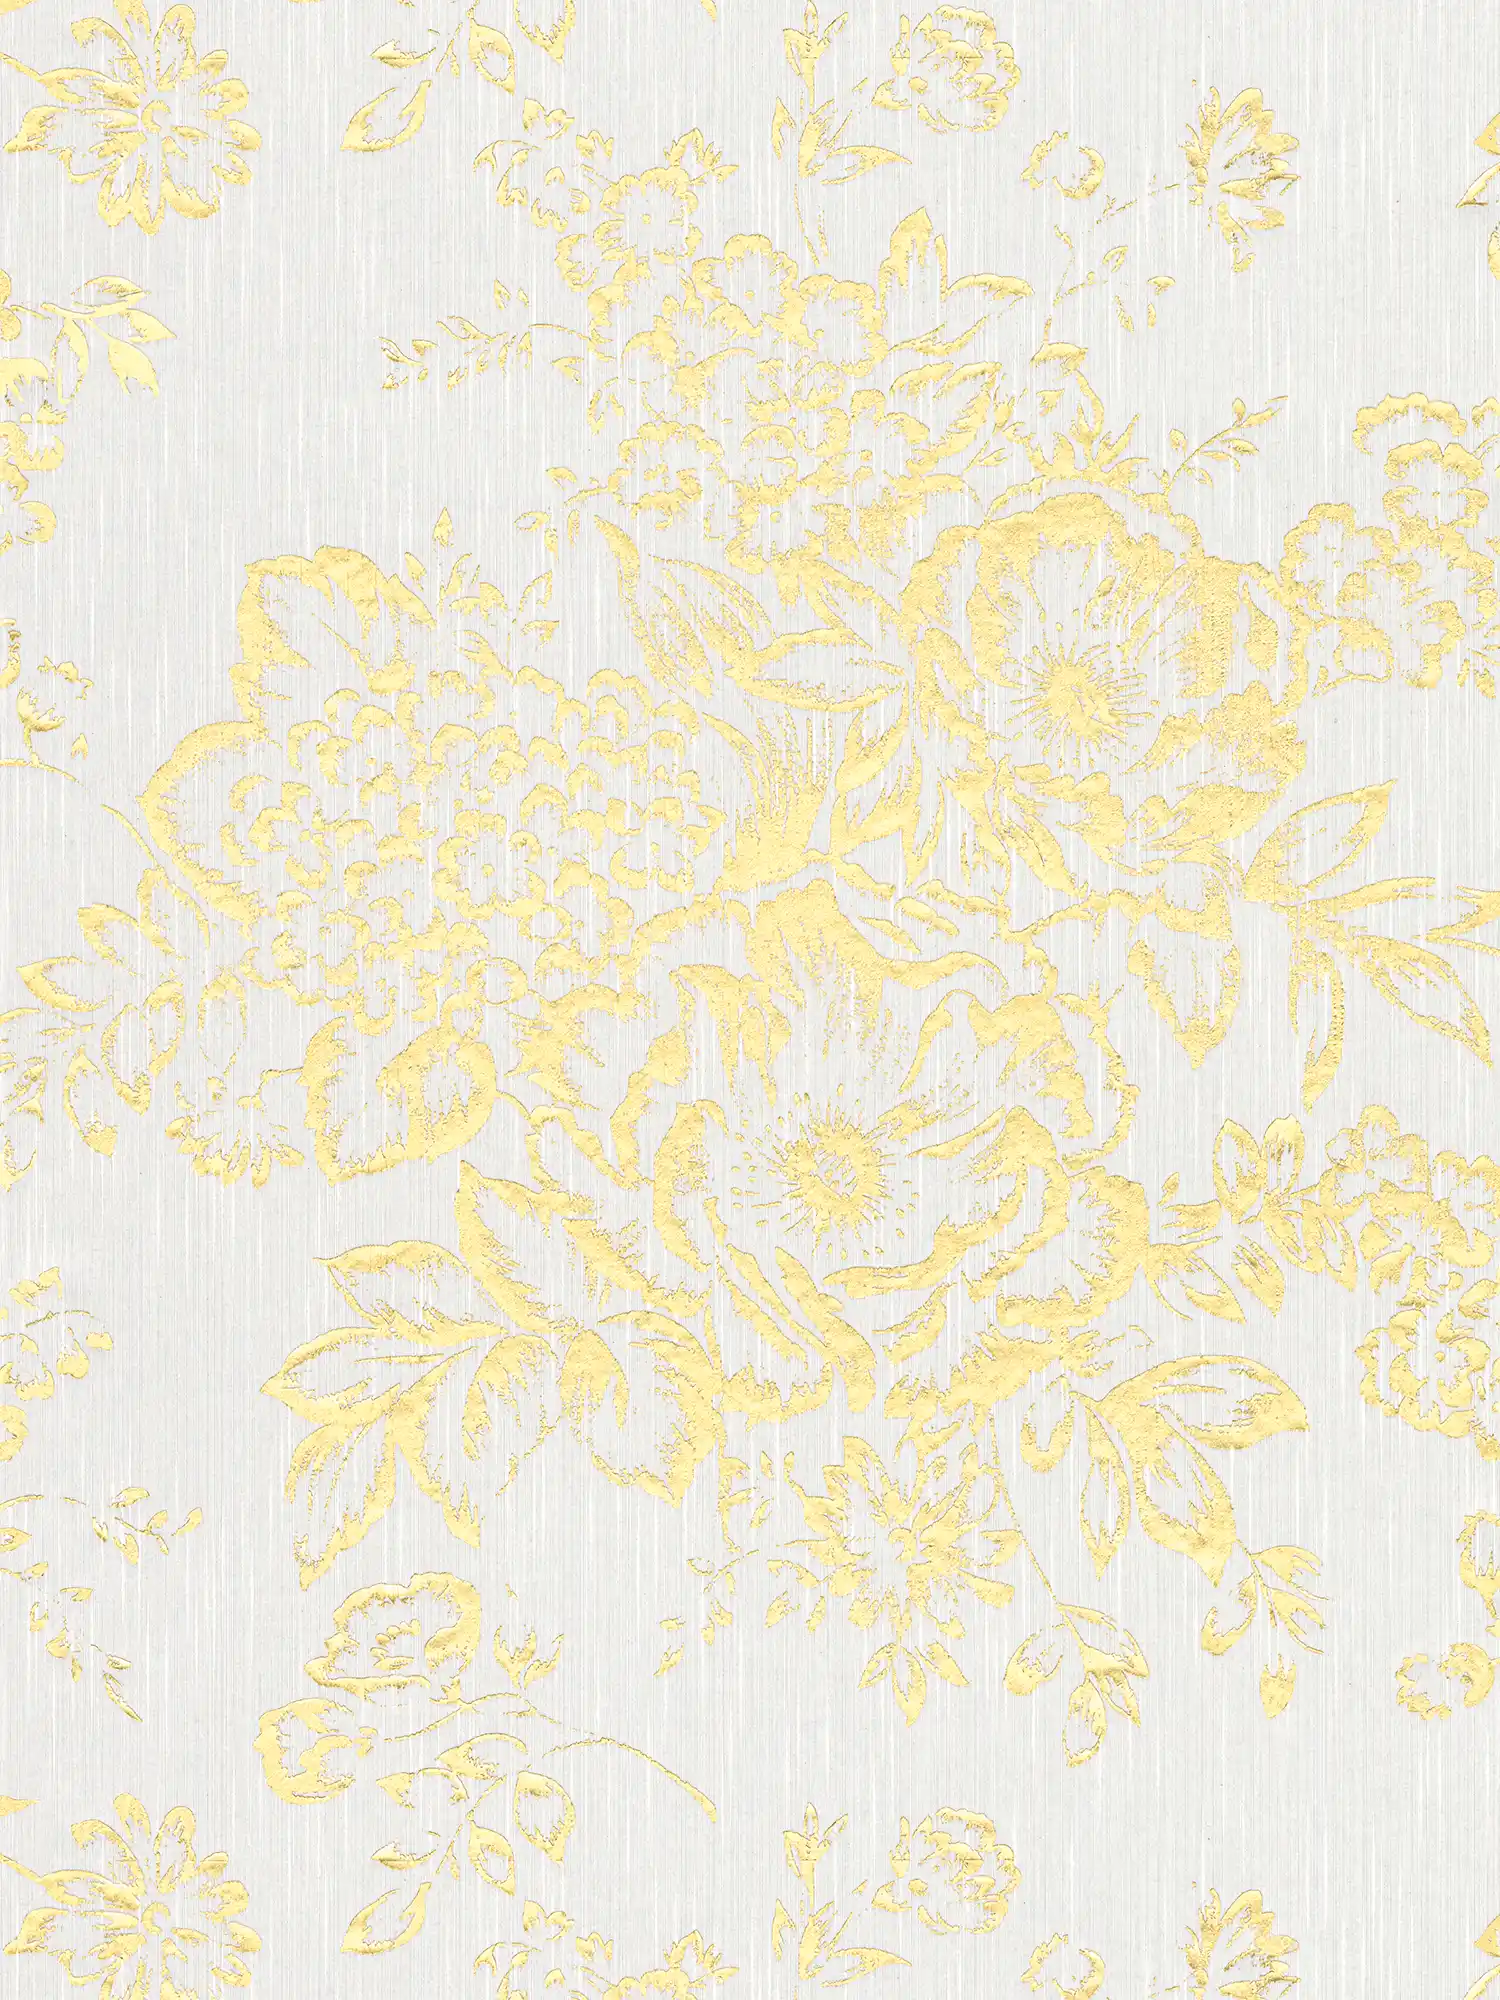 Textured wallpaper with golden floral pattern - gold, white
